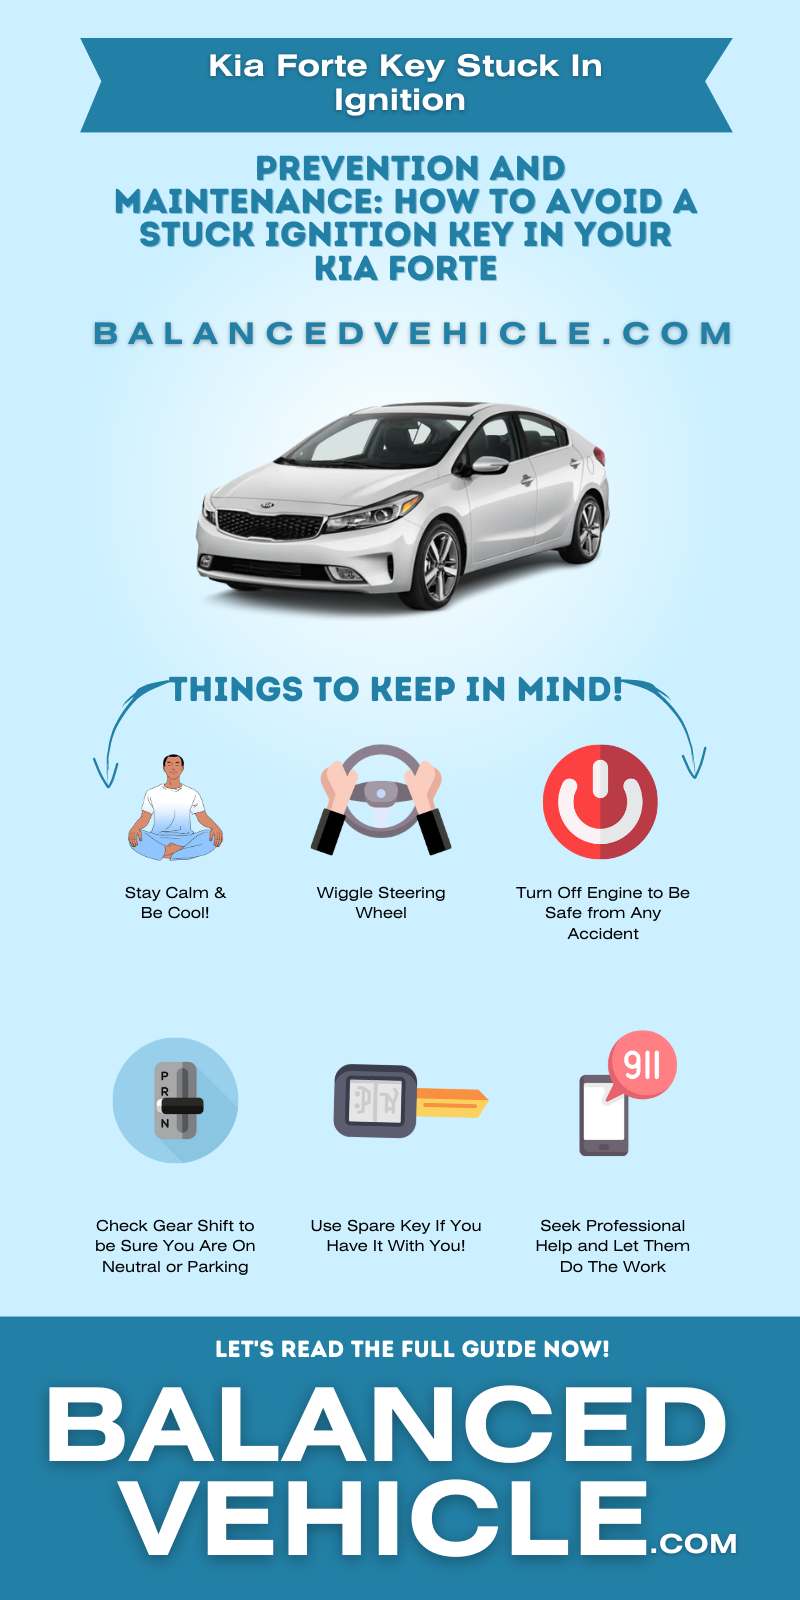 Kia forte Key Stuck In Ignition Infographic guided by BalancedVehicle.com 